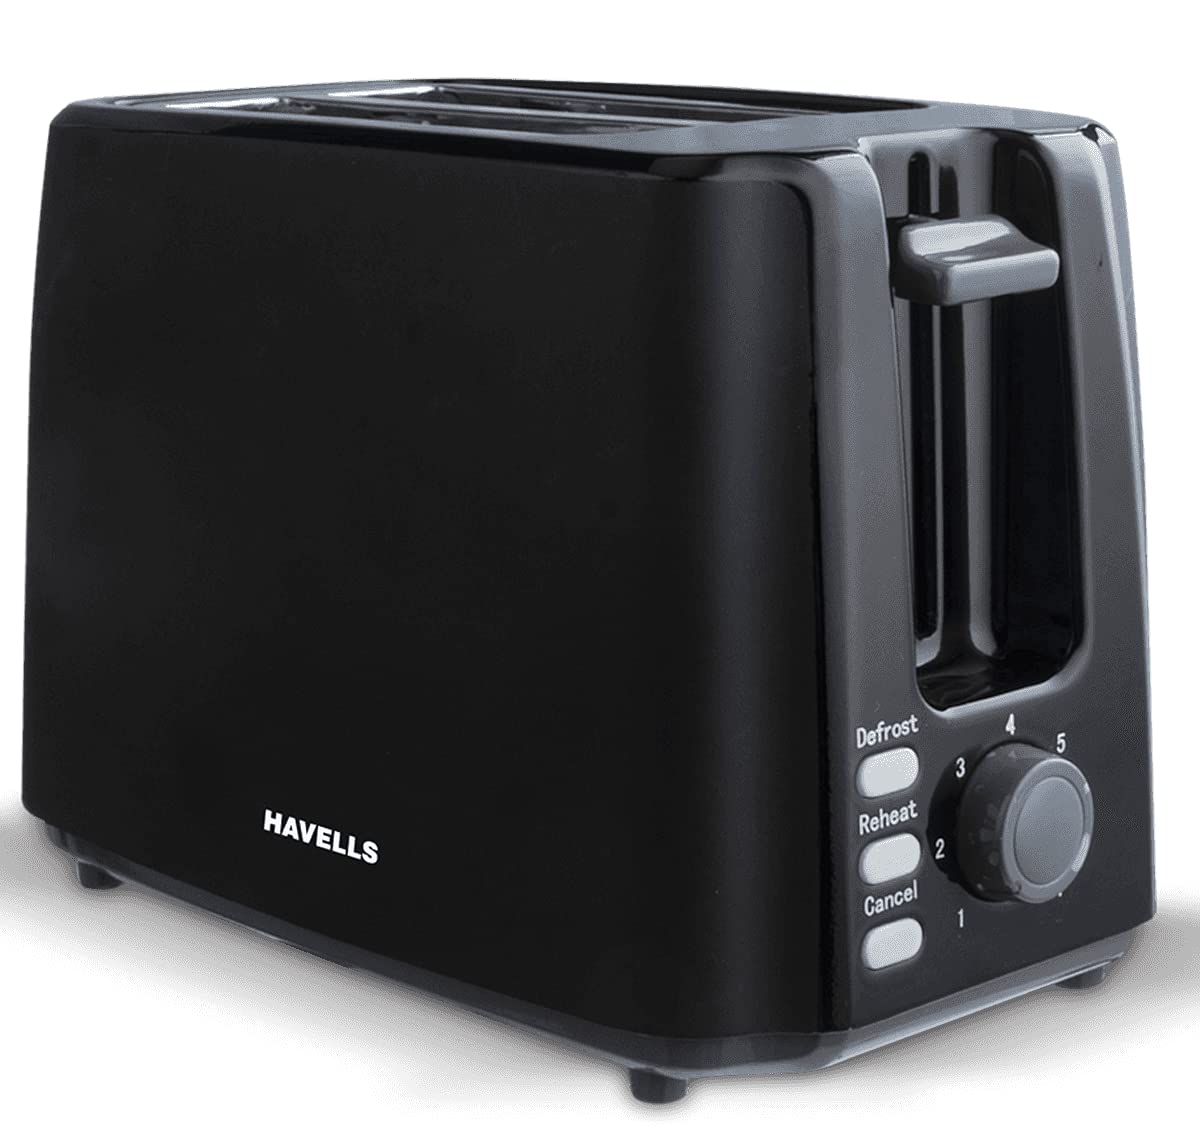 Best Toaster 2022 For Flawless Golden Brown Toasts